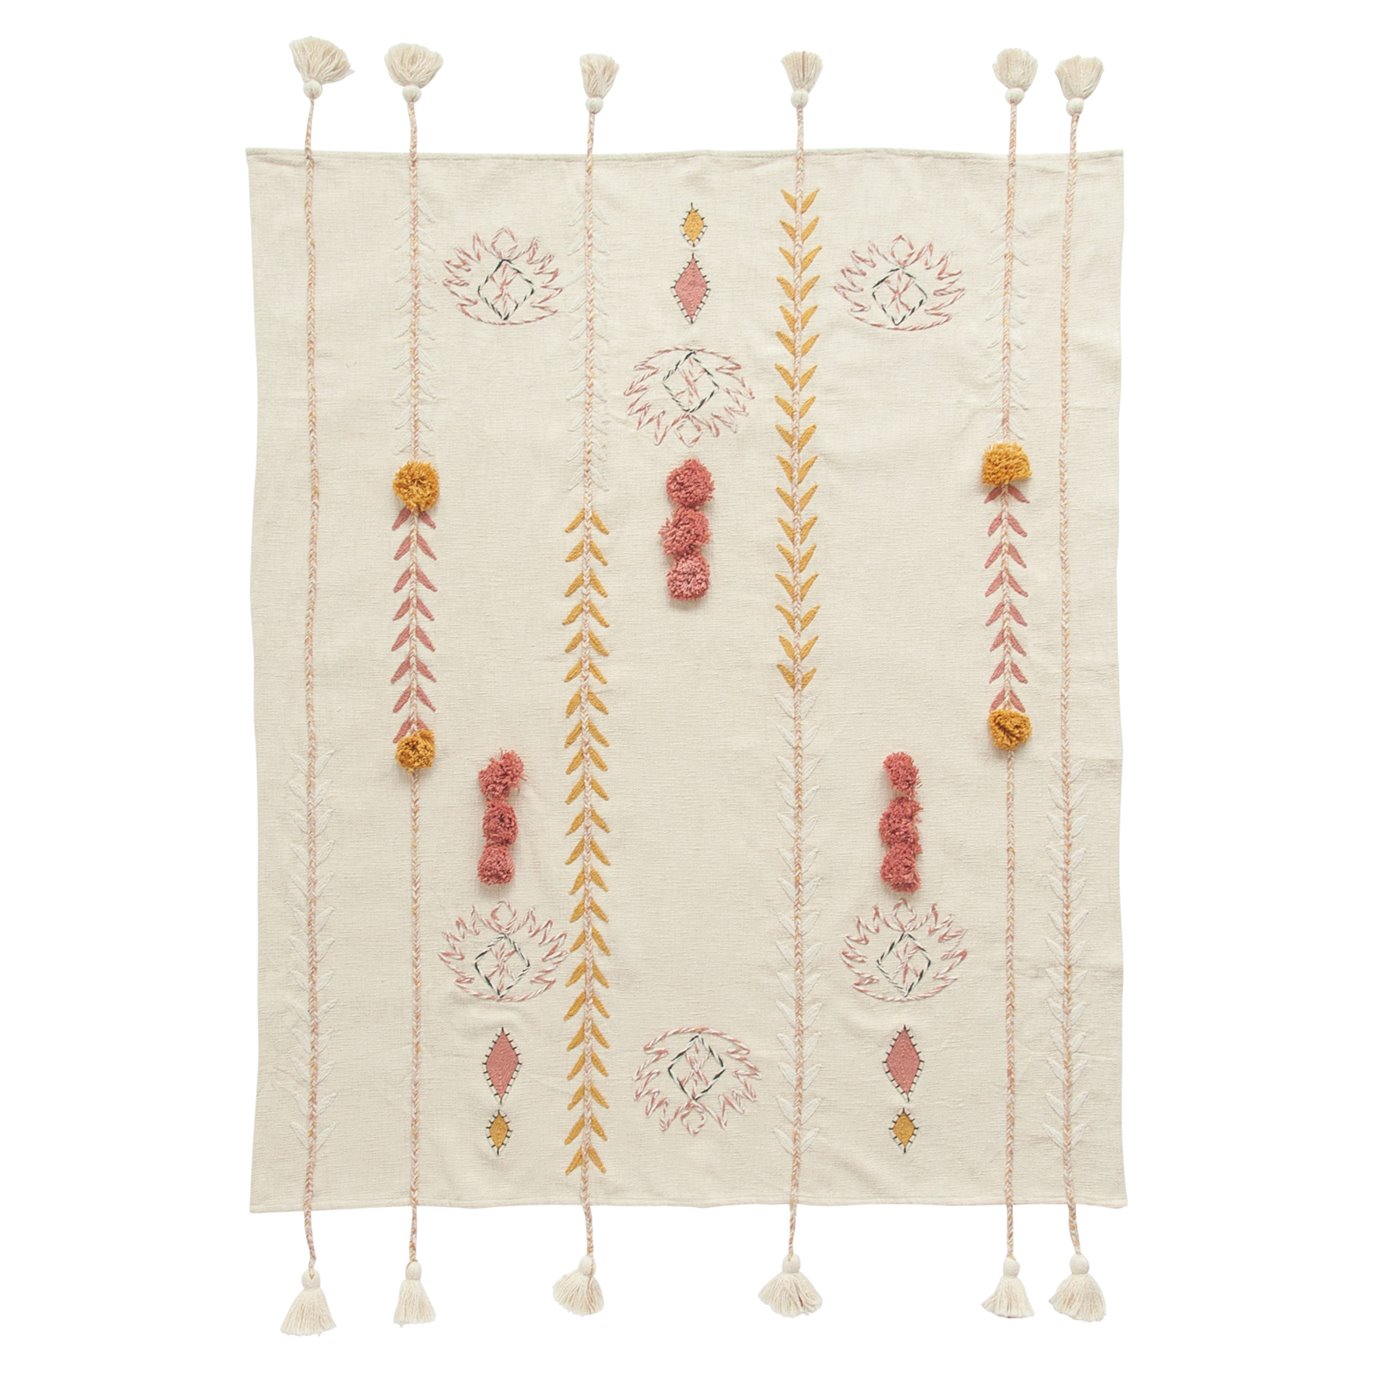 Embroidered Cream Cotton Throw with Decorative Applique, Pom Poms & Tassels